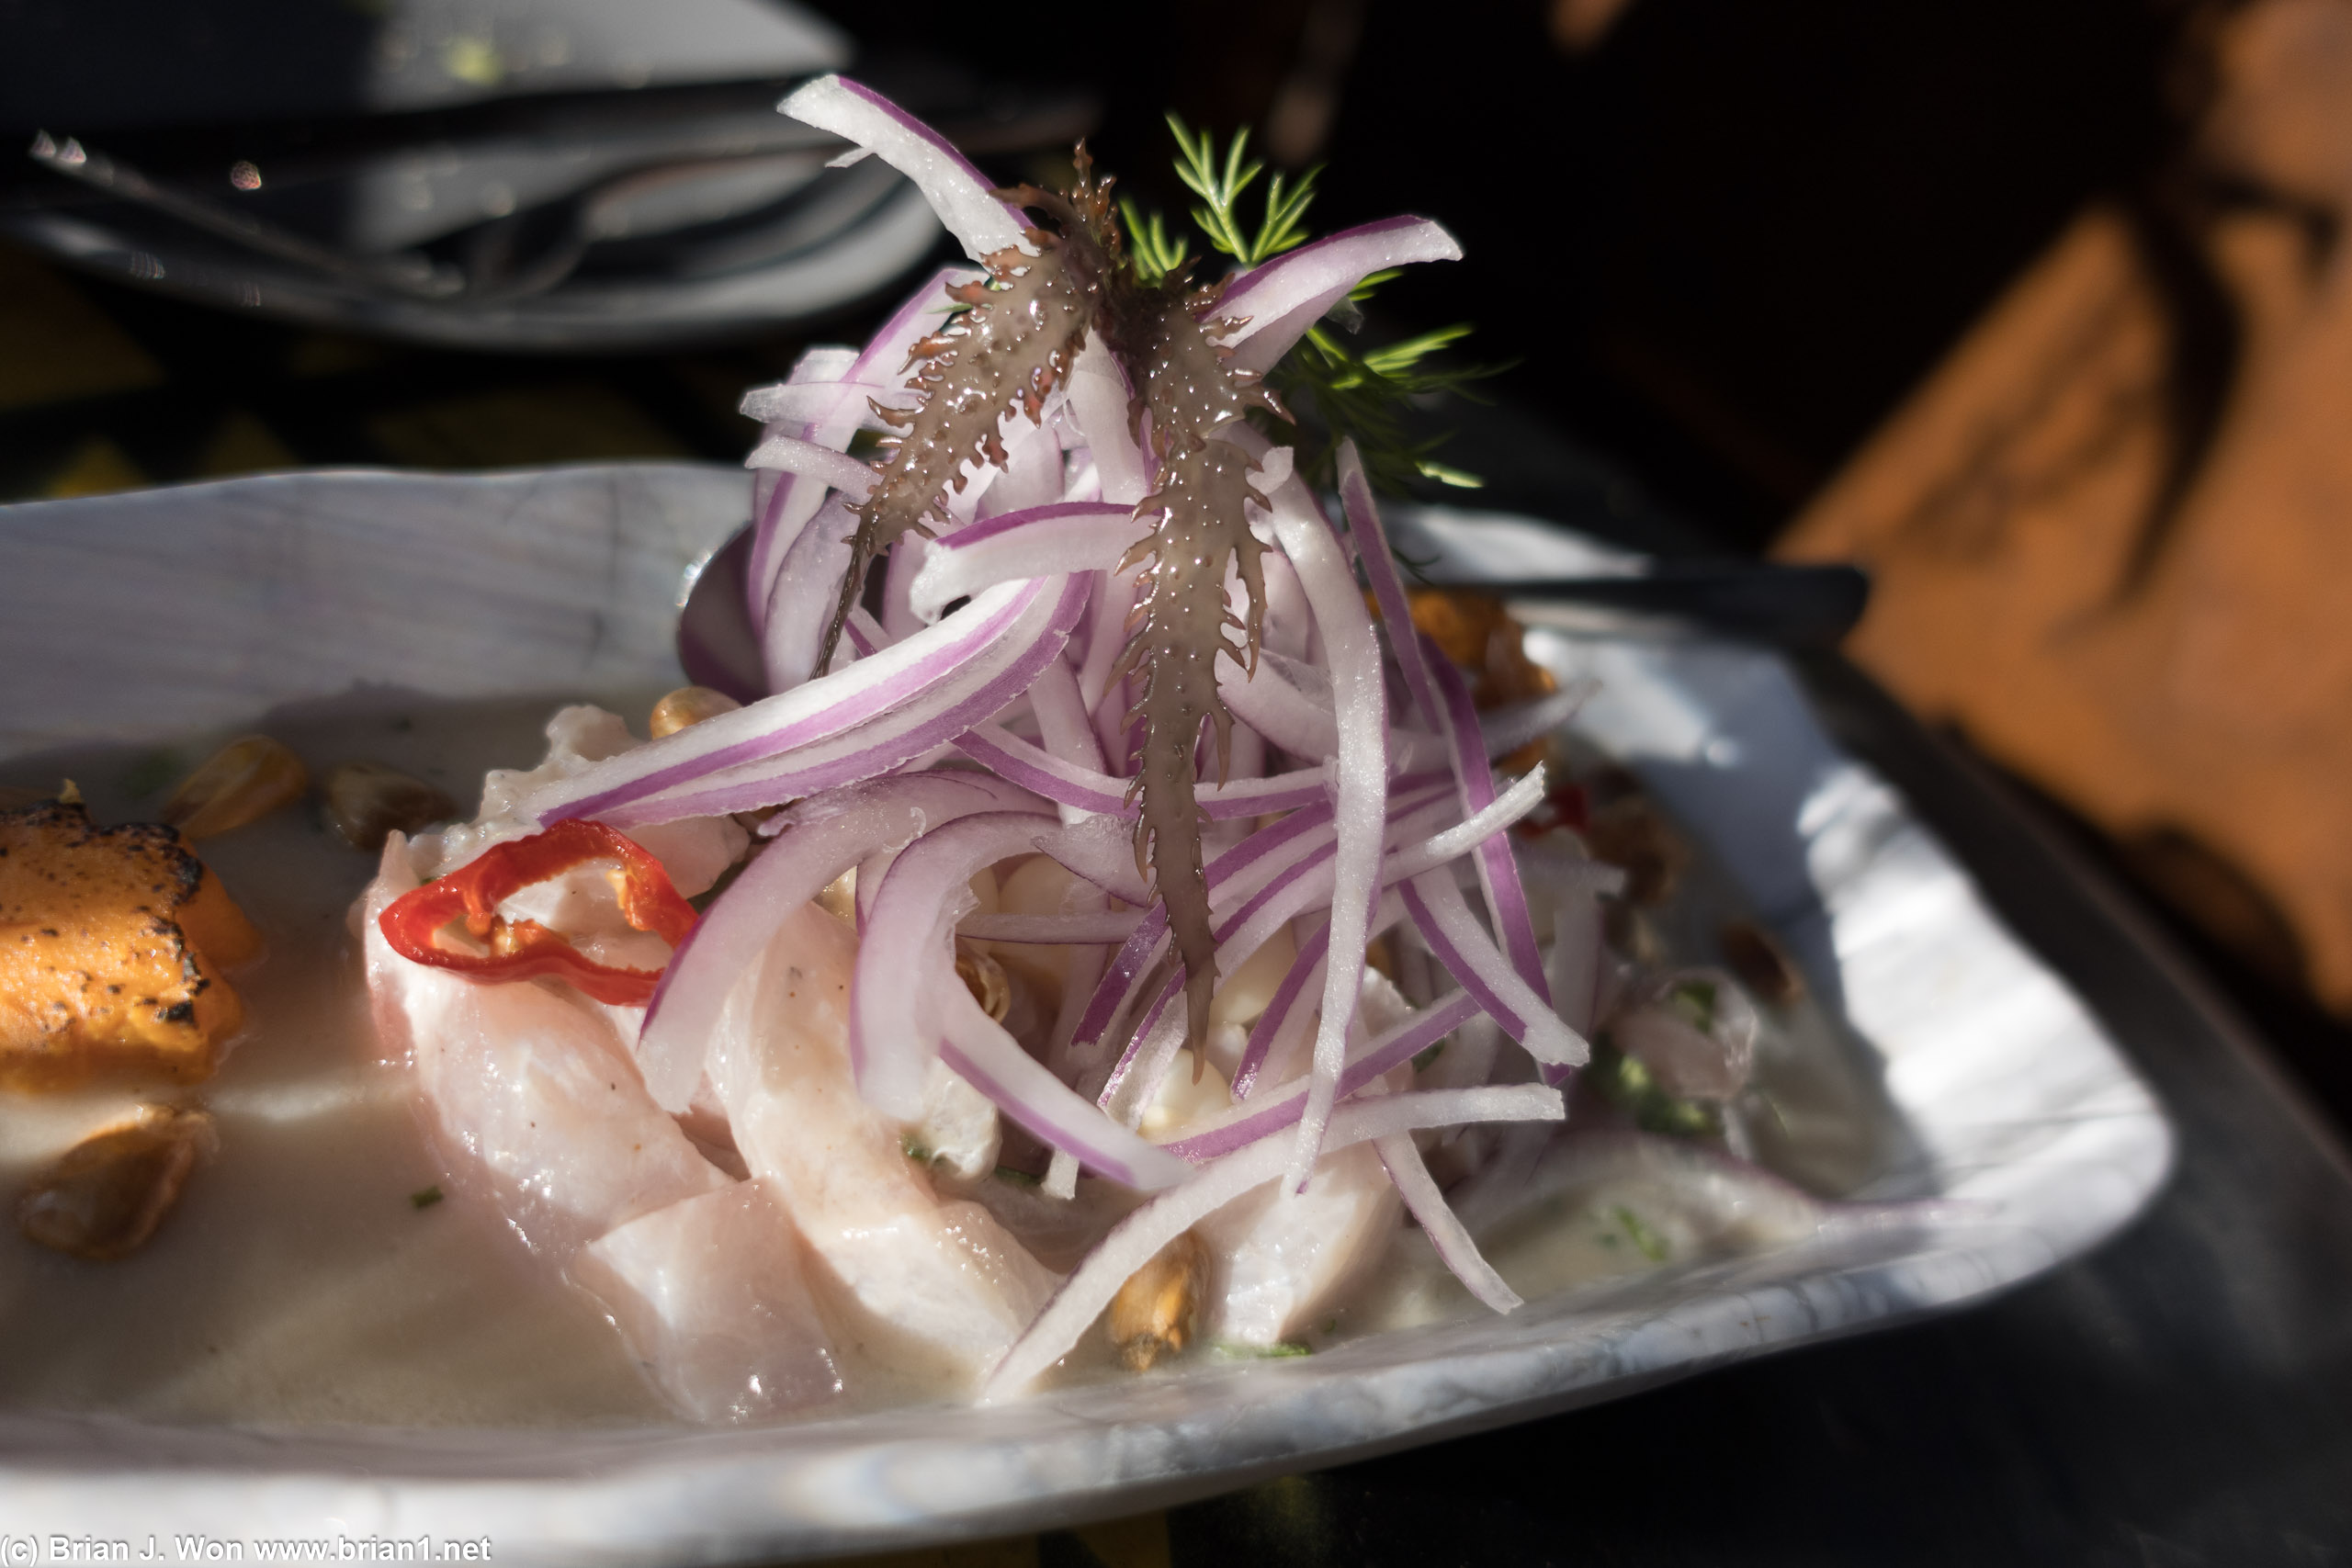 Fisherman's ceviche (amberjack) was very traditional in style. Excellent.